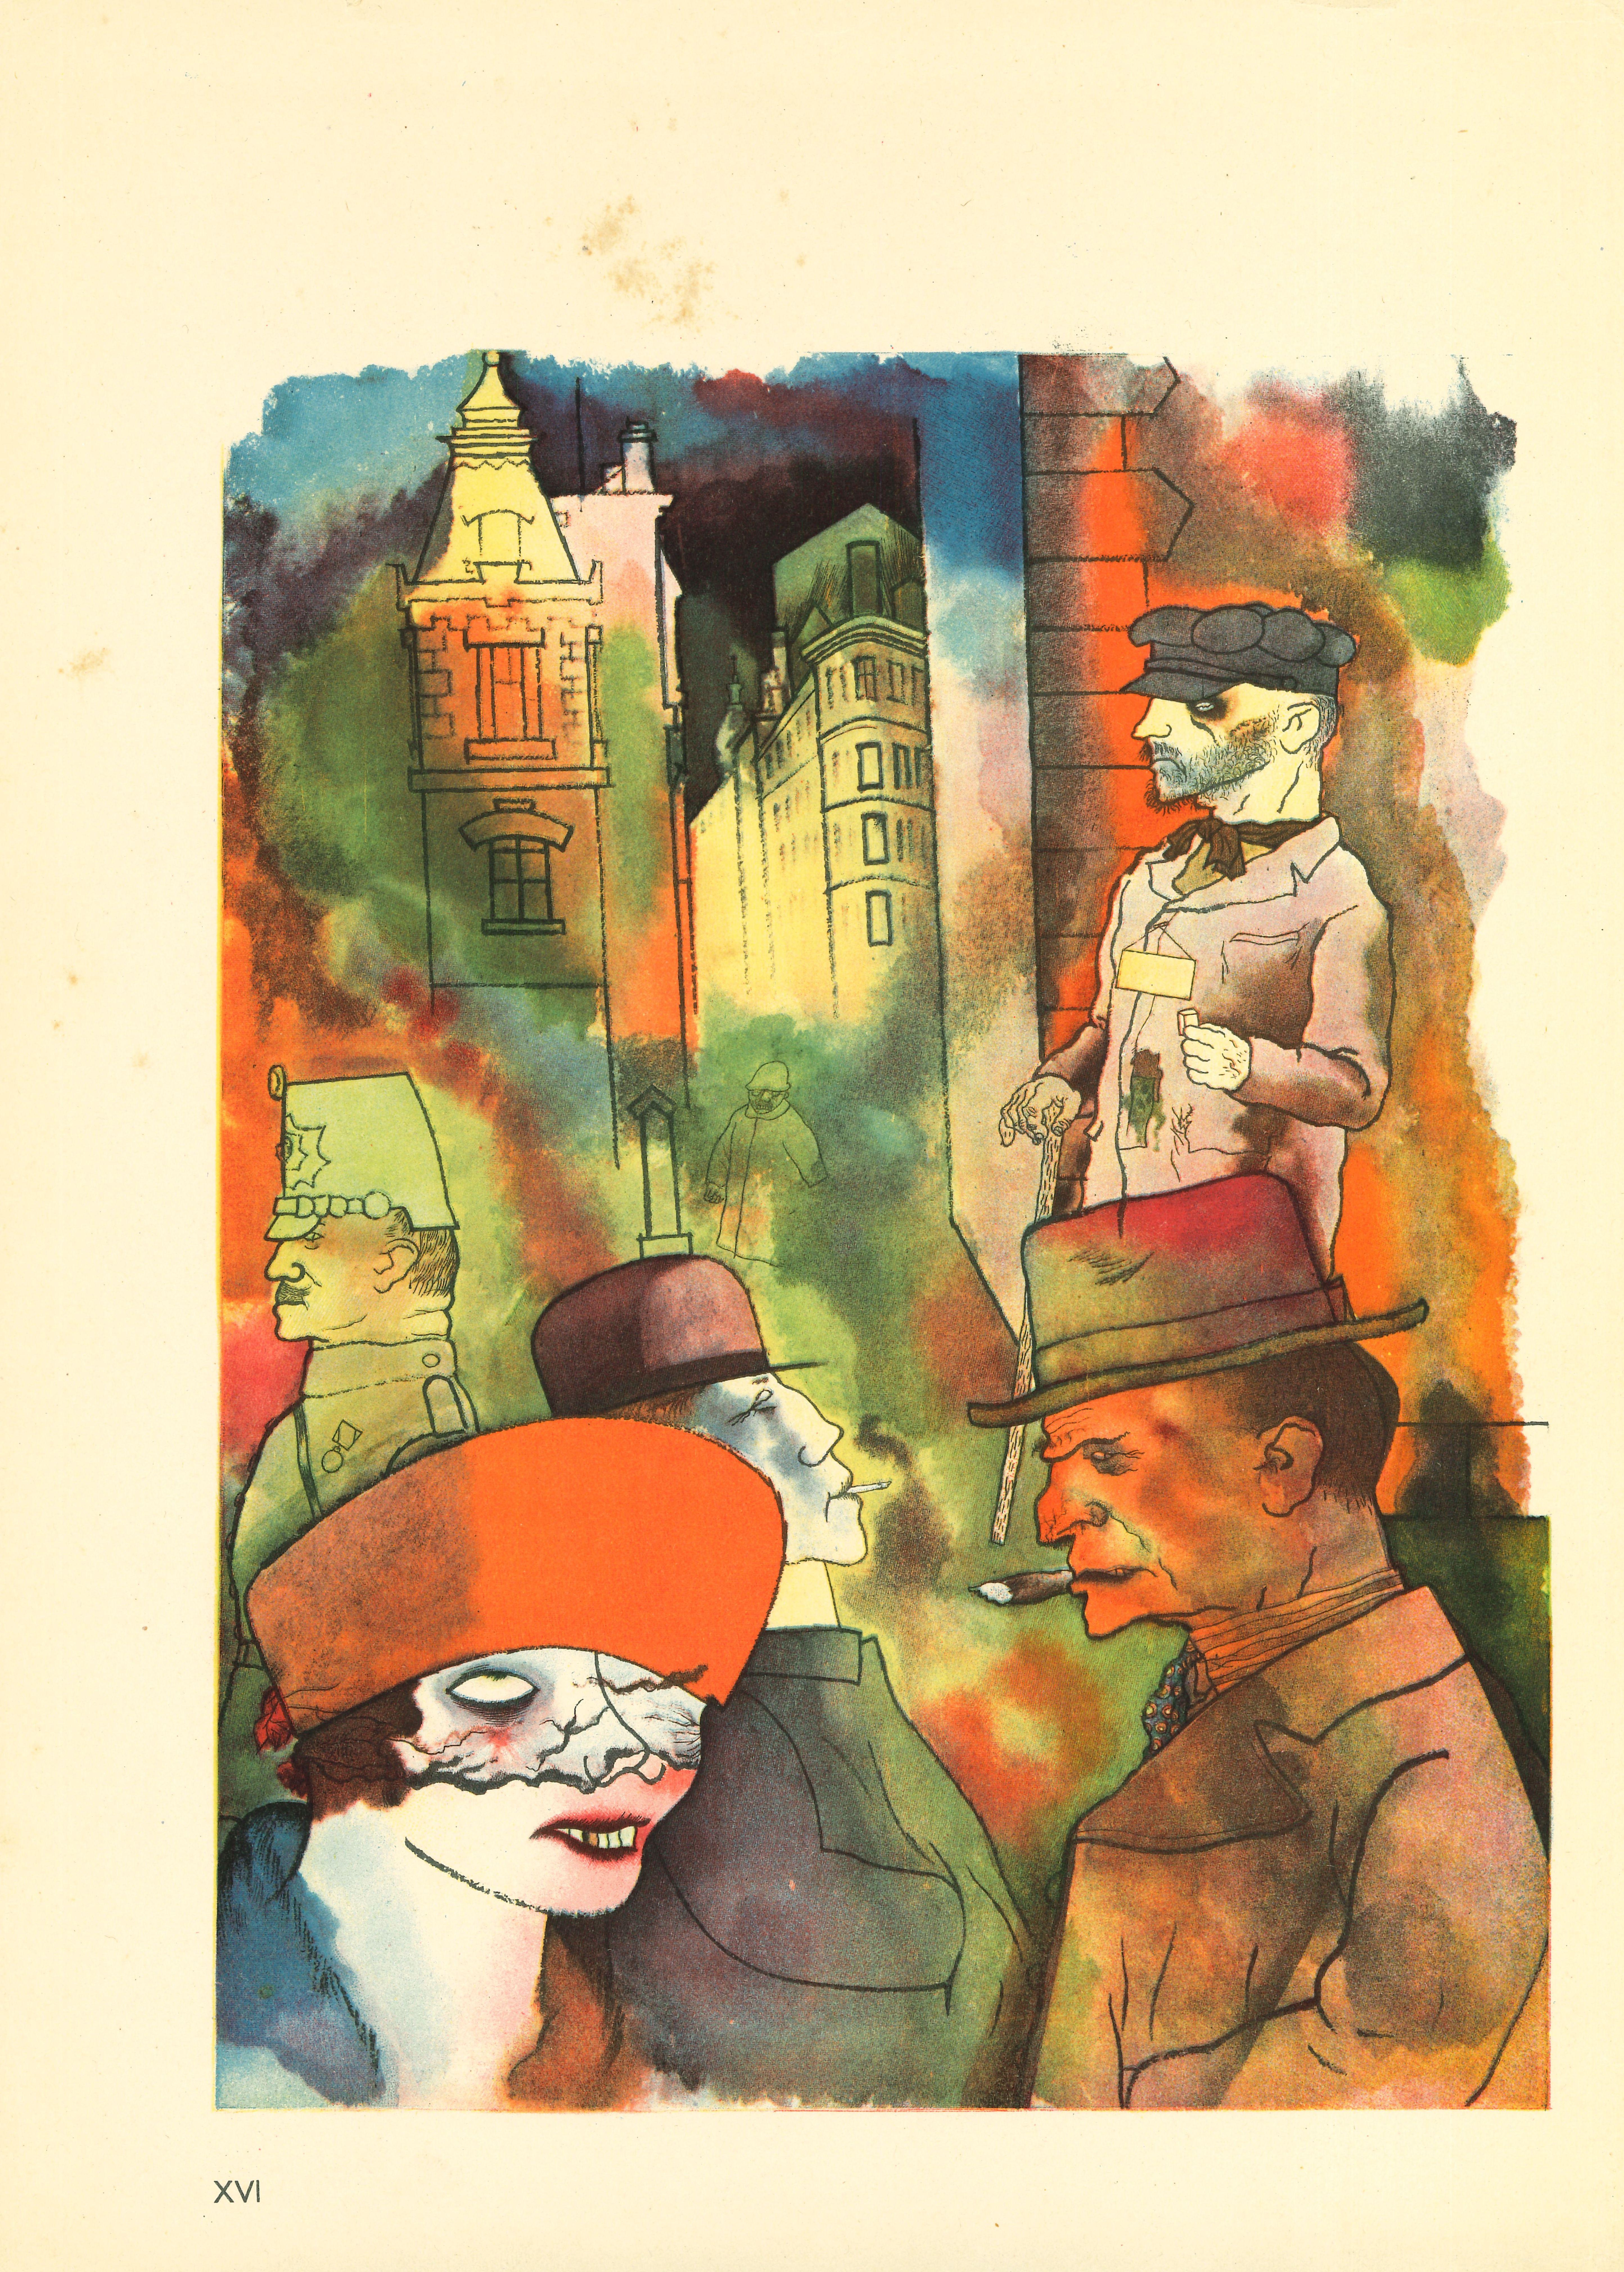 Twilight is an original seven-color offset and lithograph, realized by George Grosz.

The artwork is the plate n. XVI from the porfolio Ecce Homo published between 1922/1923, edition of Der Malik-Verlag Berlin, that includes offset and lithograph